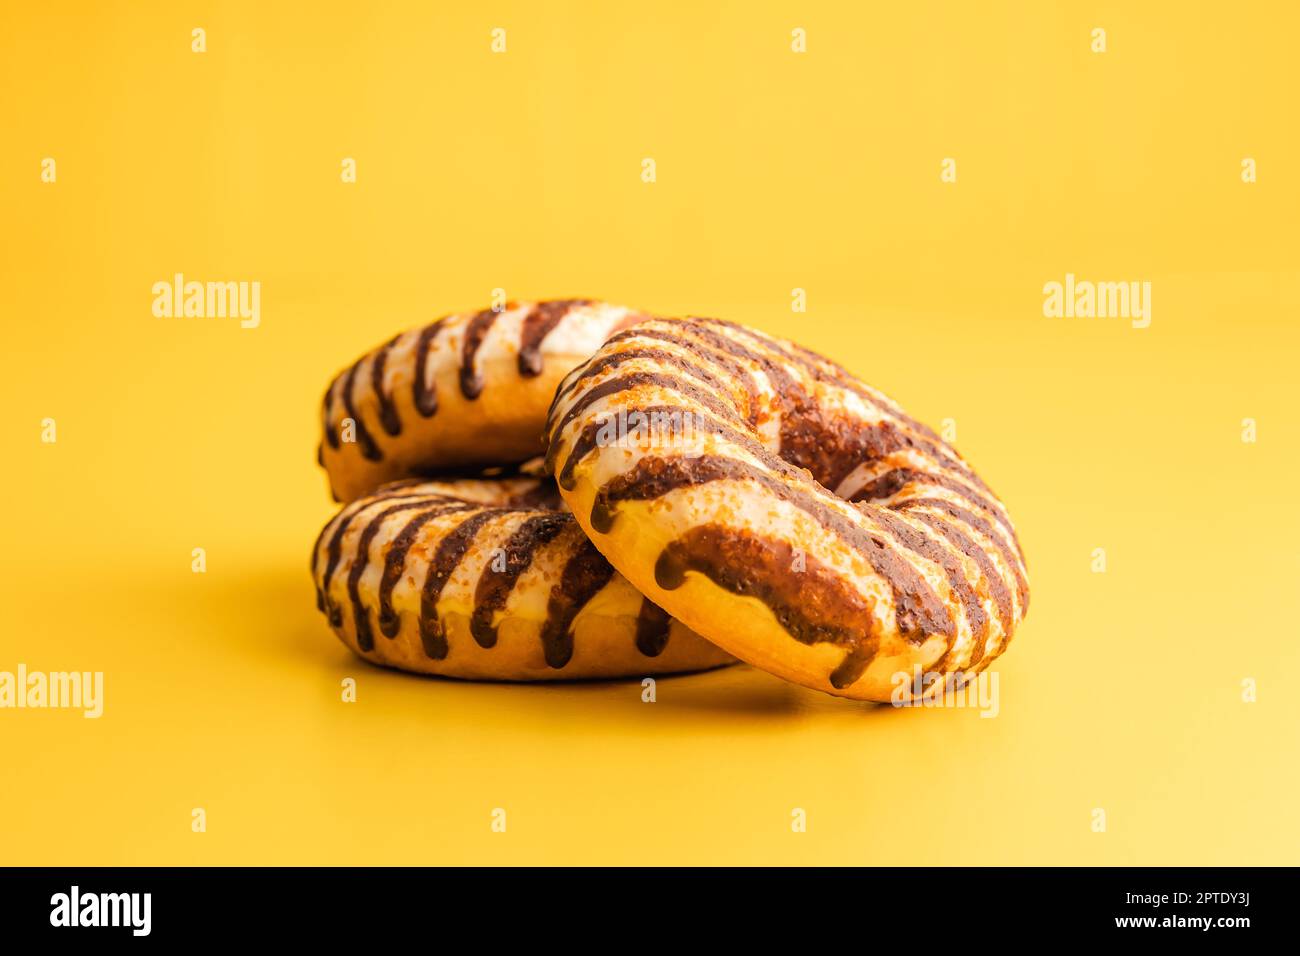 Donut with chocolate and caramel icing on the yellow background. Stock Photo